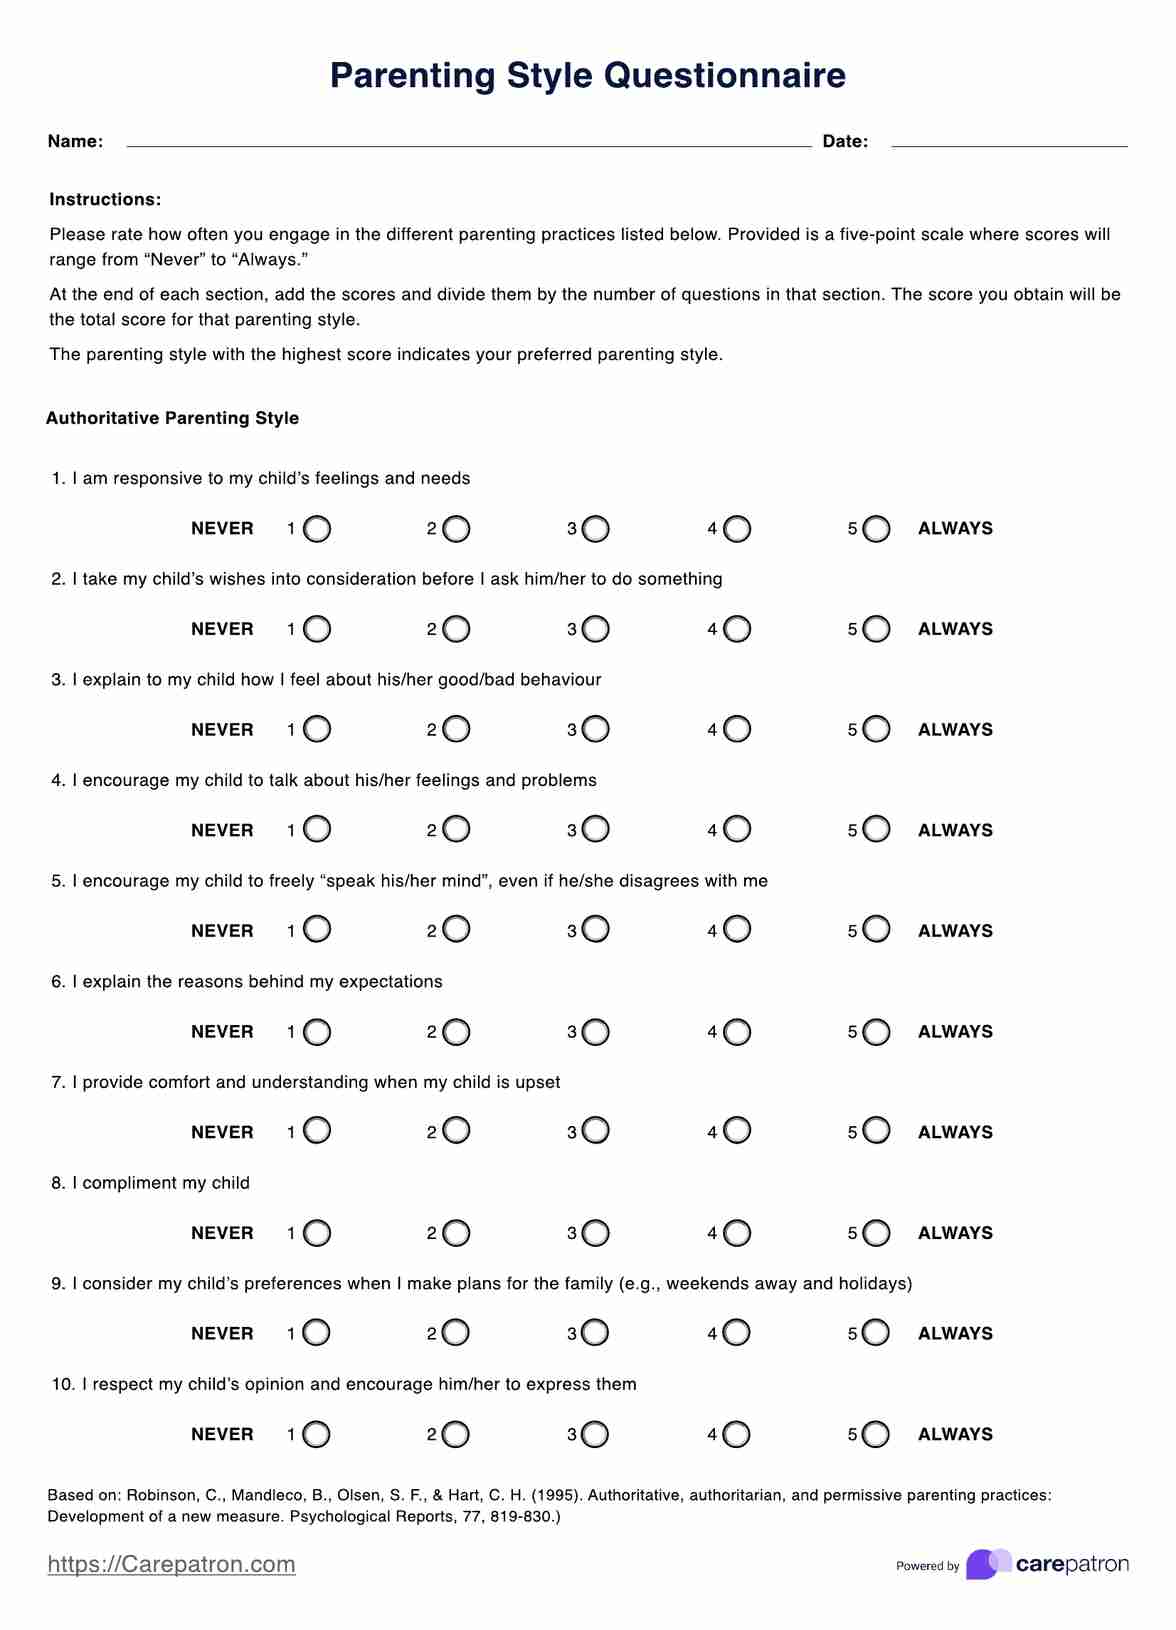 Parenting Styles Questionnaires PDF Example